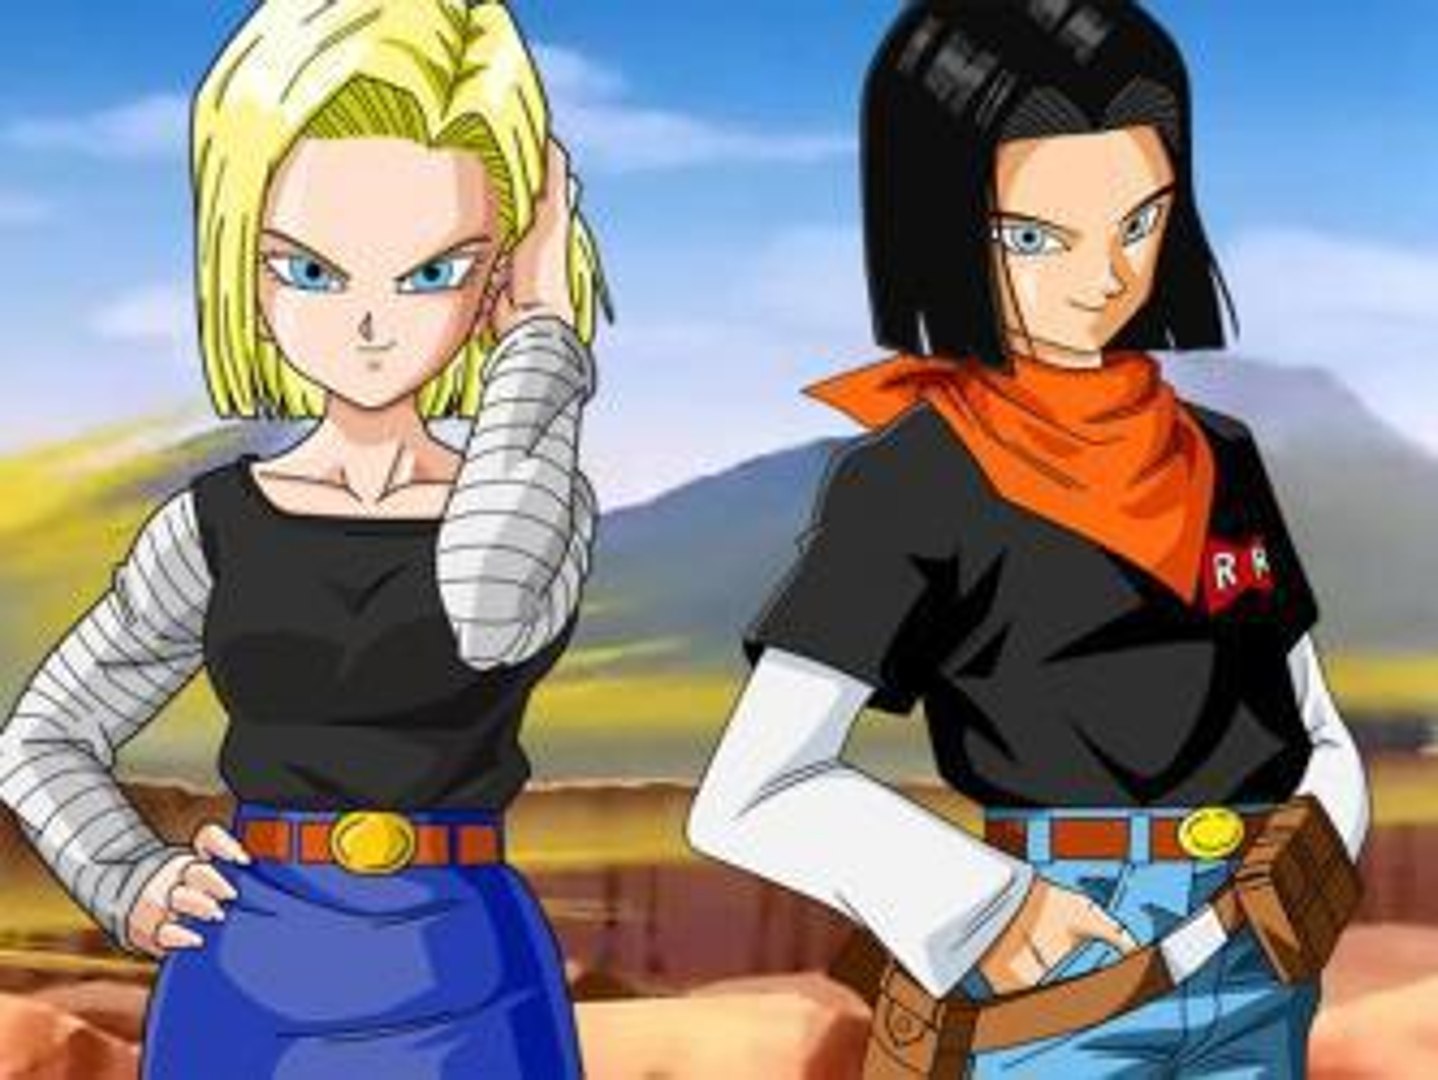 DRAGON BALL ANDROIDES 17 y 18 VS GOHAN LOQUENDO - Vídeo Dailymotion